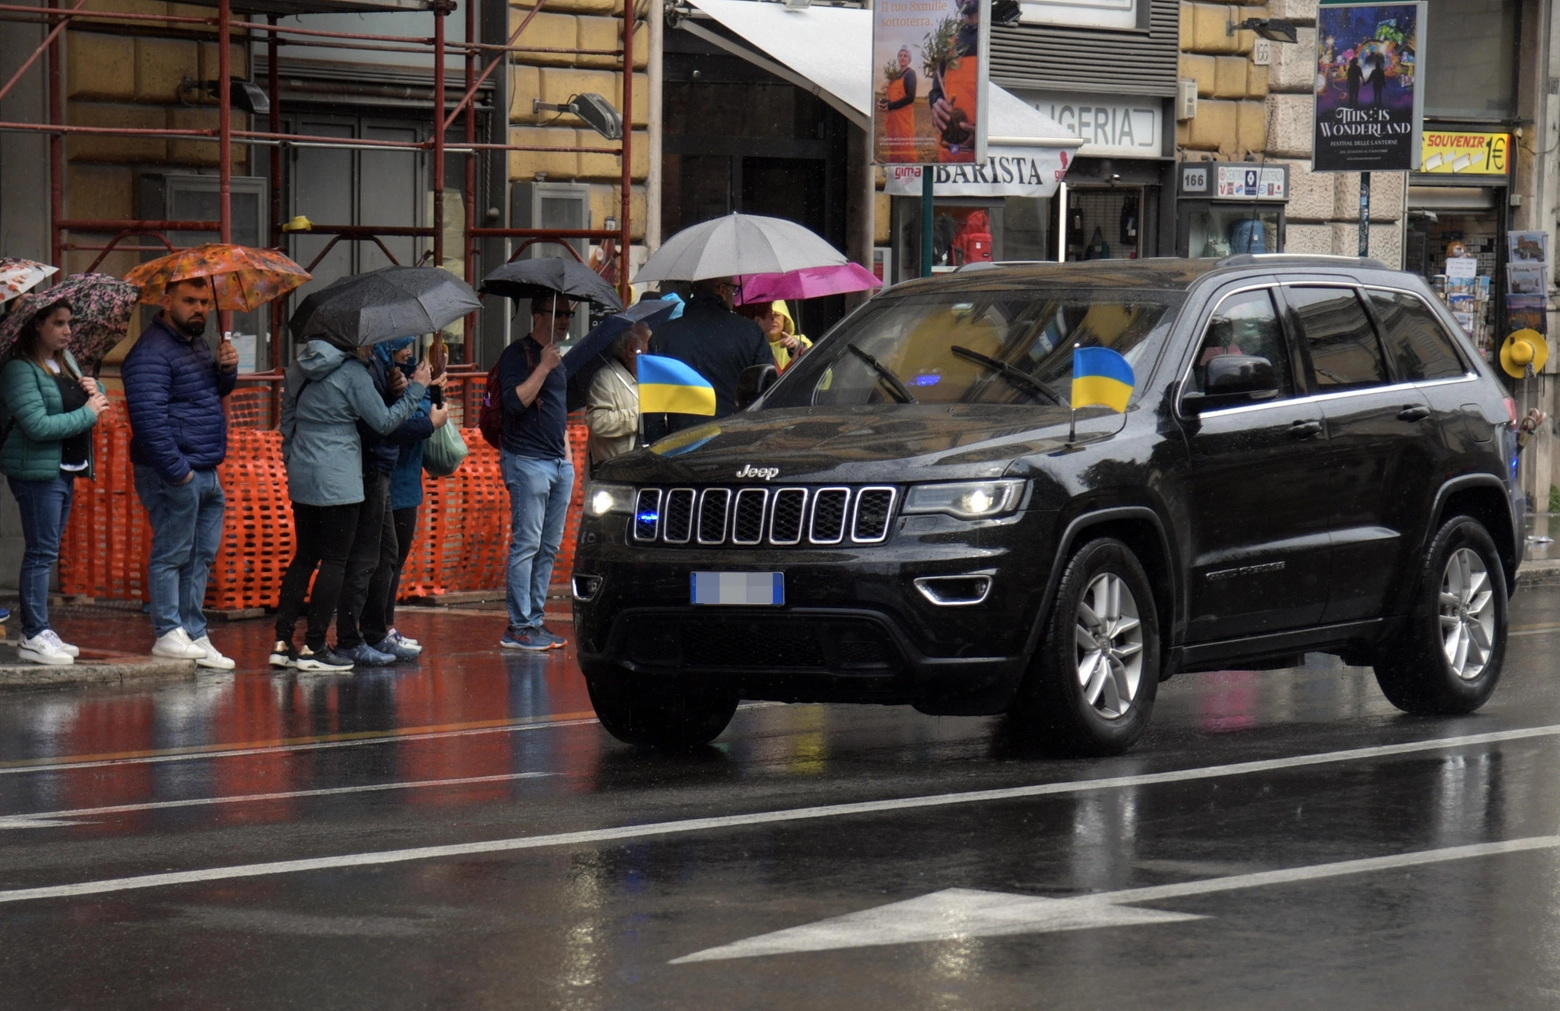 The car (with Ukrainan flags)of Ukrainian President Volodymyr Zelensky near piazza Barberini  on its way to Italian President Mattarella in Rome, Italy, 13 May 2023. It is the first time for Zelensky to visit Italy since the start of the Russian invasion of Ukraine in February 2022. 
ANSA/FABIO CIMAGLIA